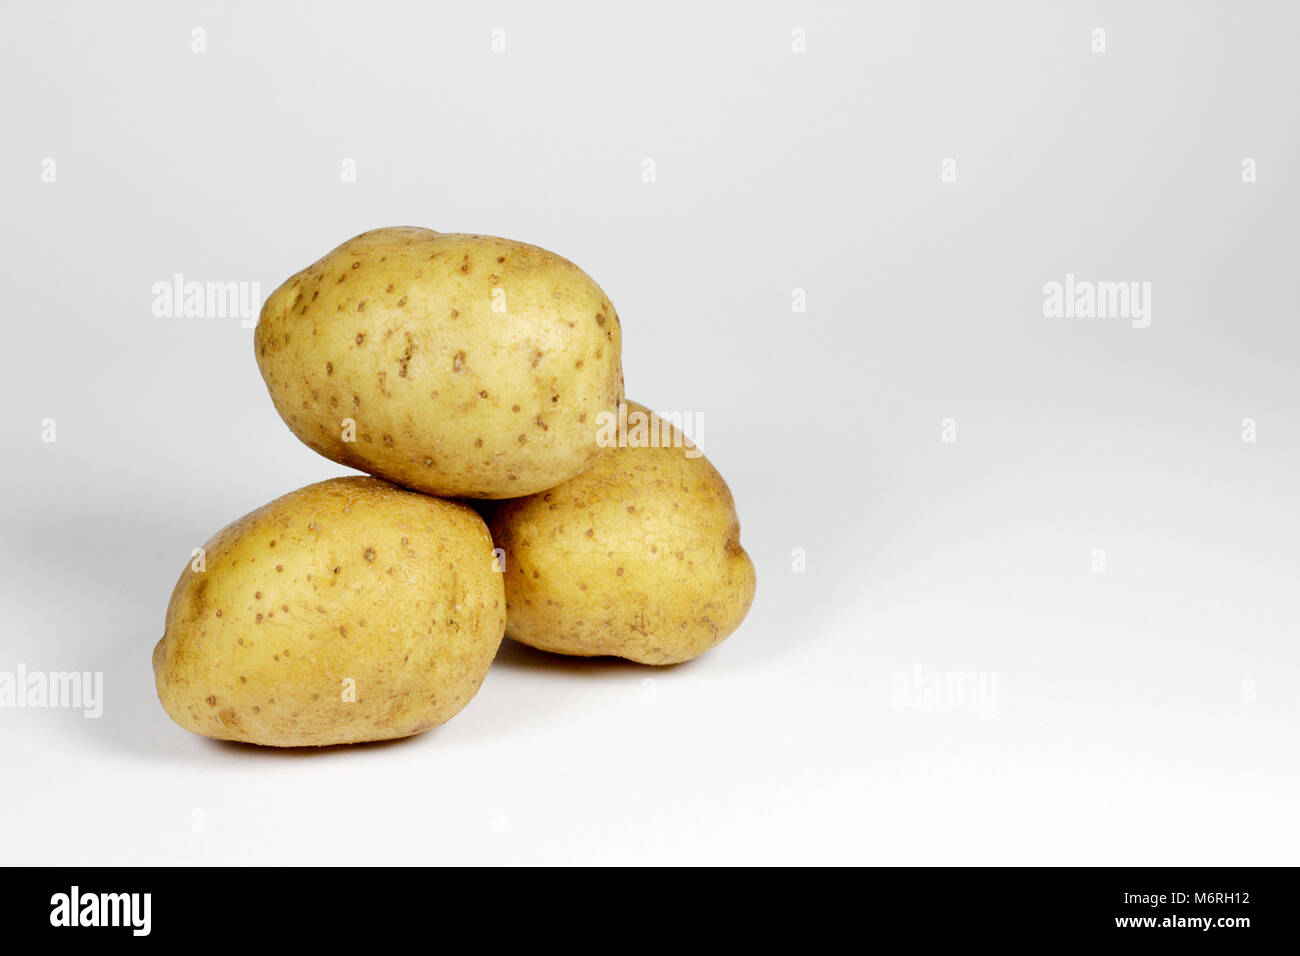 Three potatoes with a white background arranged piled up Stock Photo